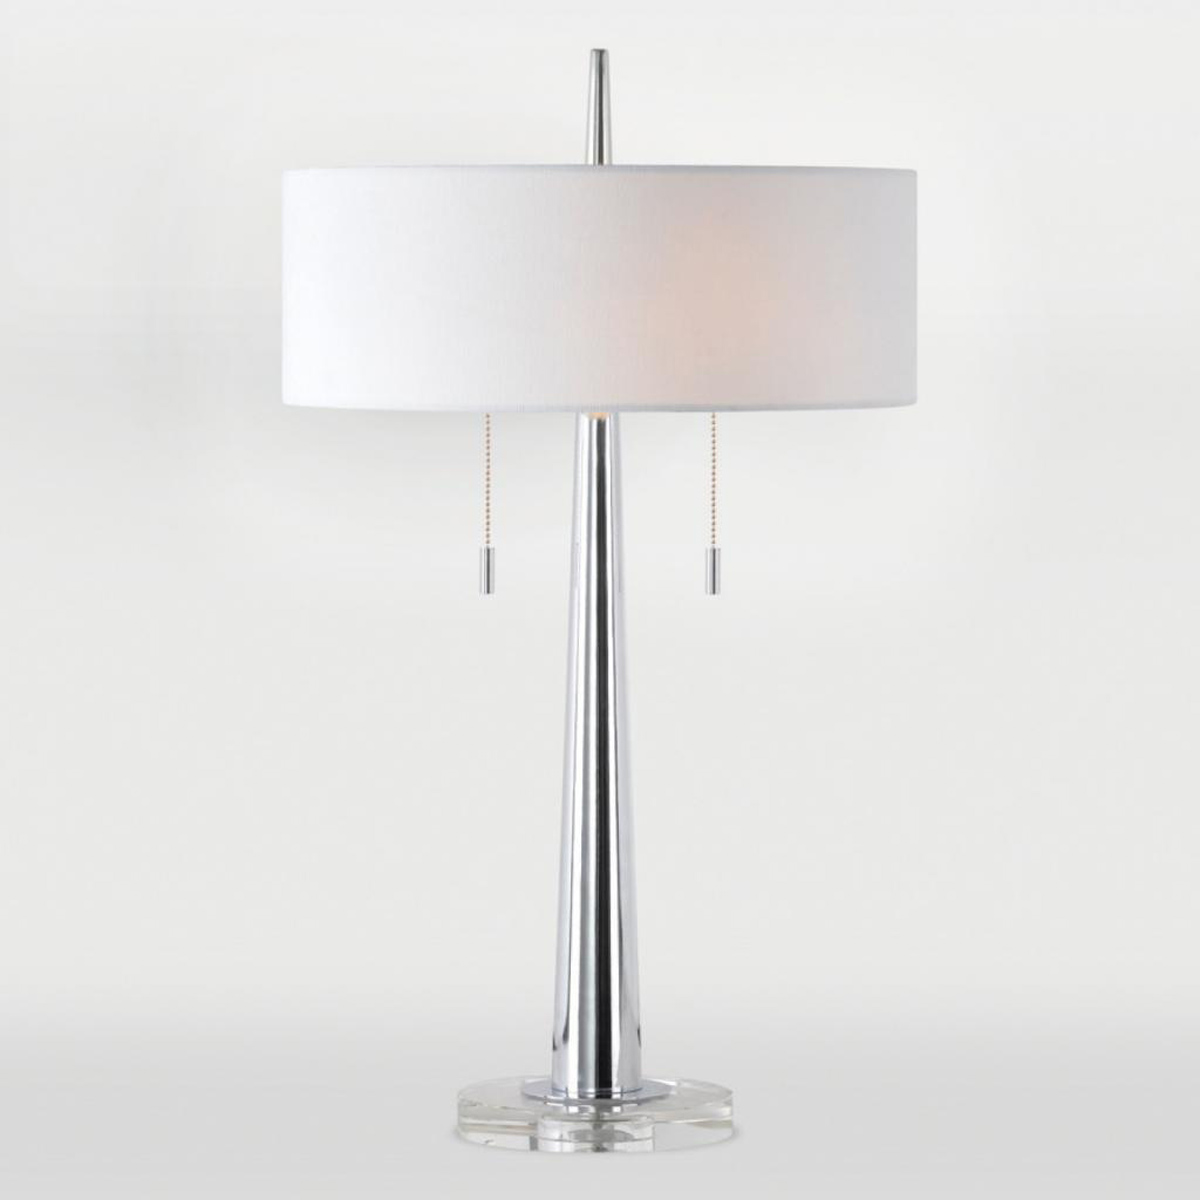 Ren-Wil Chios Table Lamp - Chrome